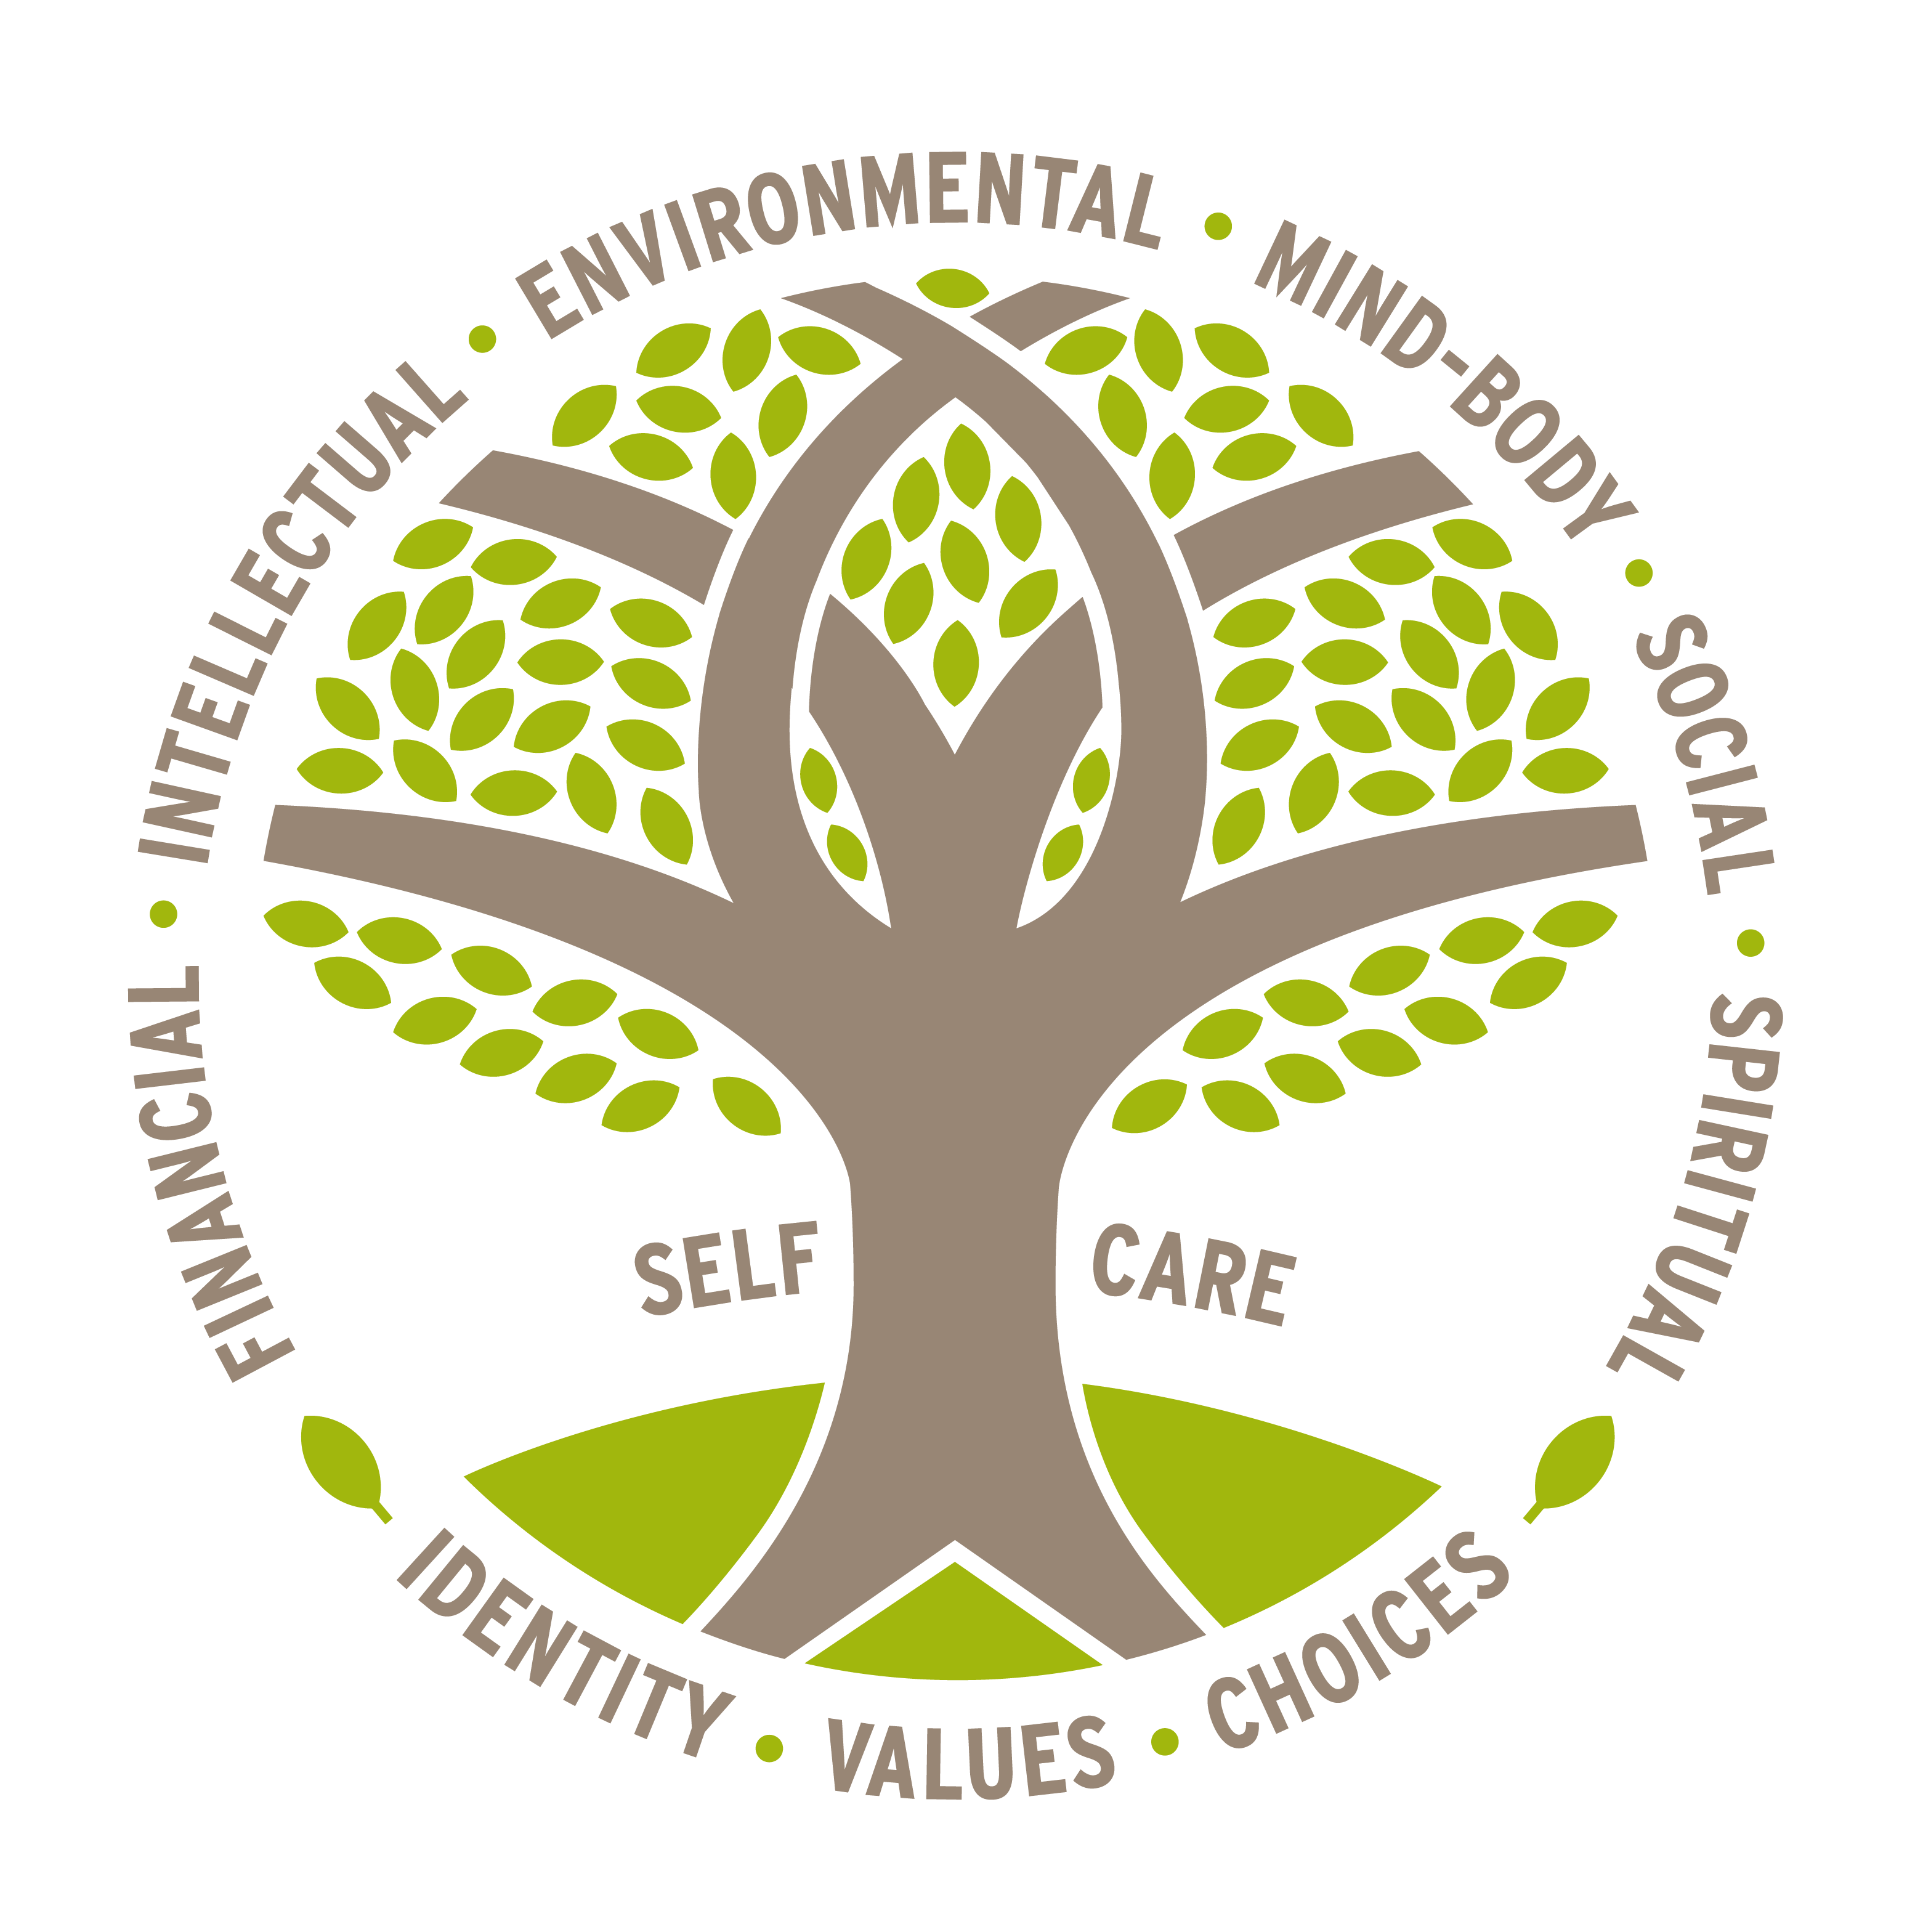 Duke Wellness Tree. Self-care as the trunk. Six dimensions of wellness as the branches. The root system consists of values, choices, and identity. 